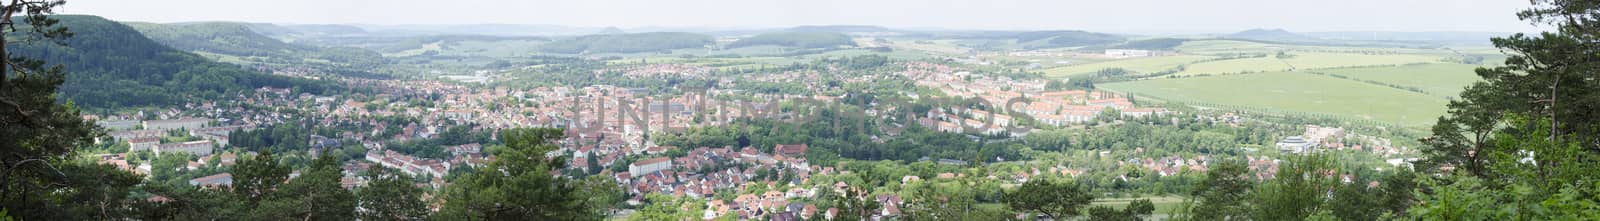 Panorama of Heilbad Heiligenstadt in Thuringia, Germany